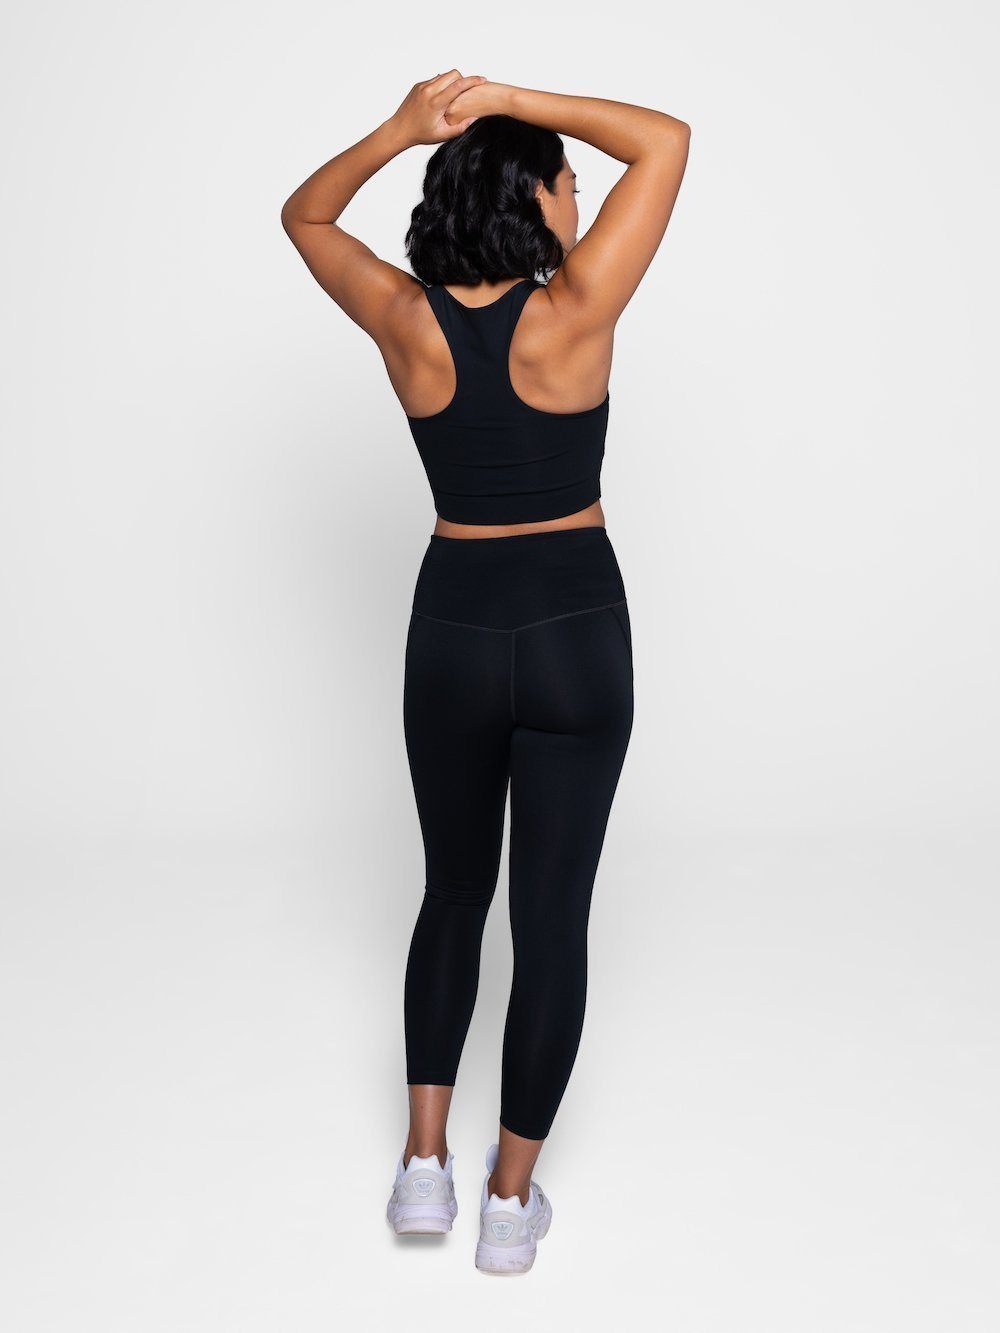 Girlfriend Collective Paloma Classic Sports Bra - Made from recycled plastic bottles Black Underwear